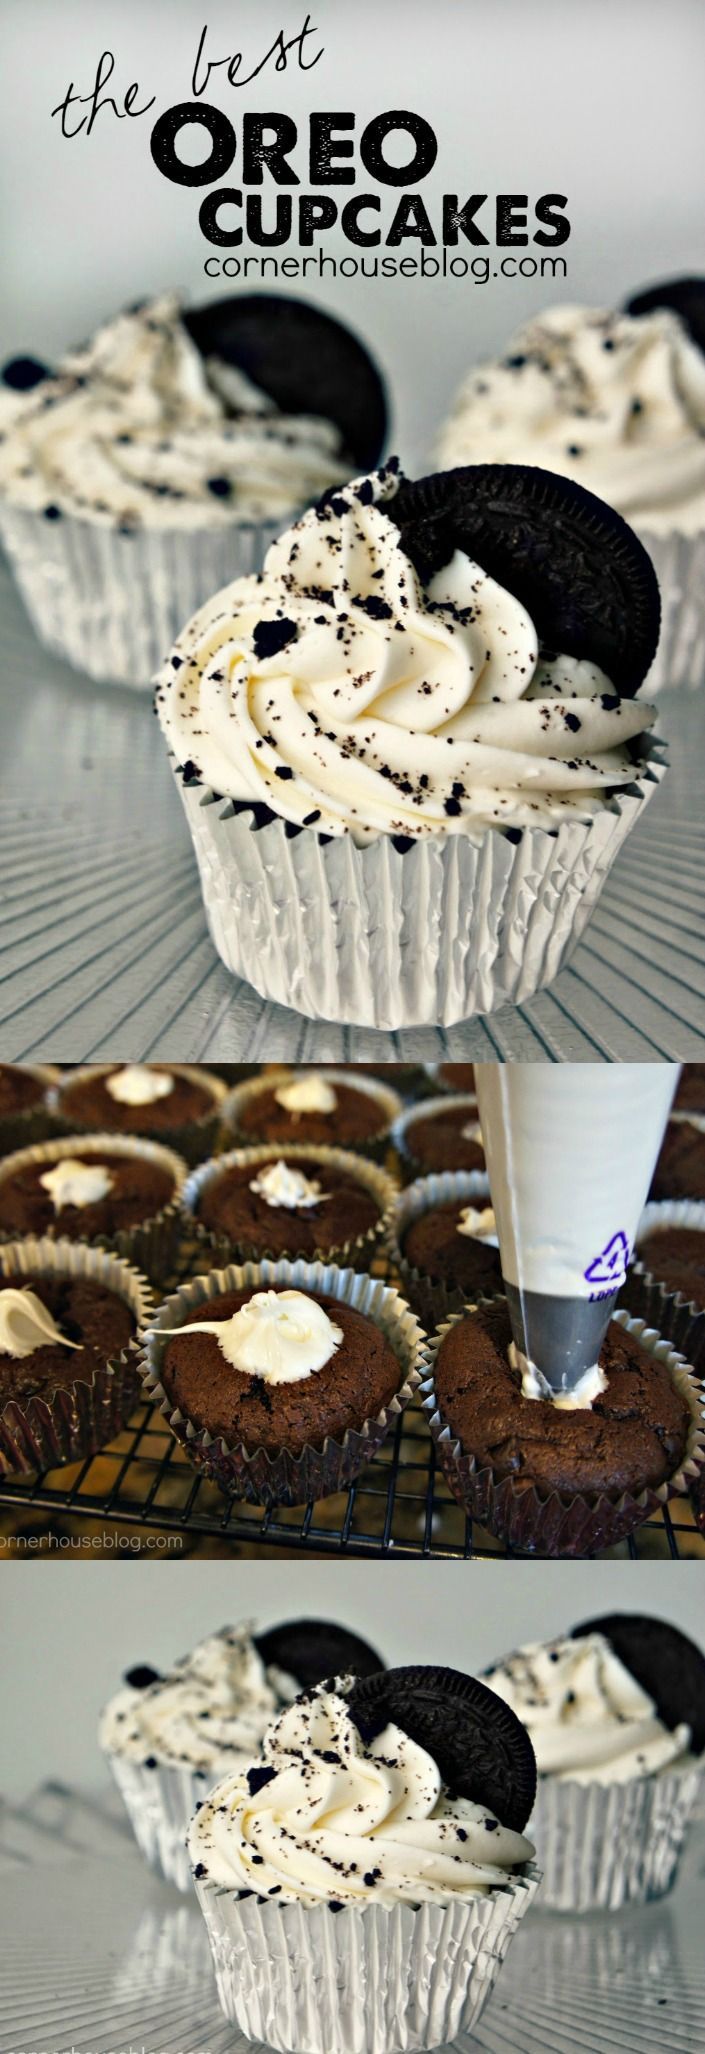 The Best Oreo Cupcakes EVER that will have everyone coming back for more.